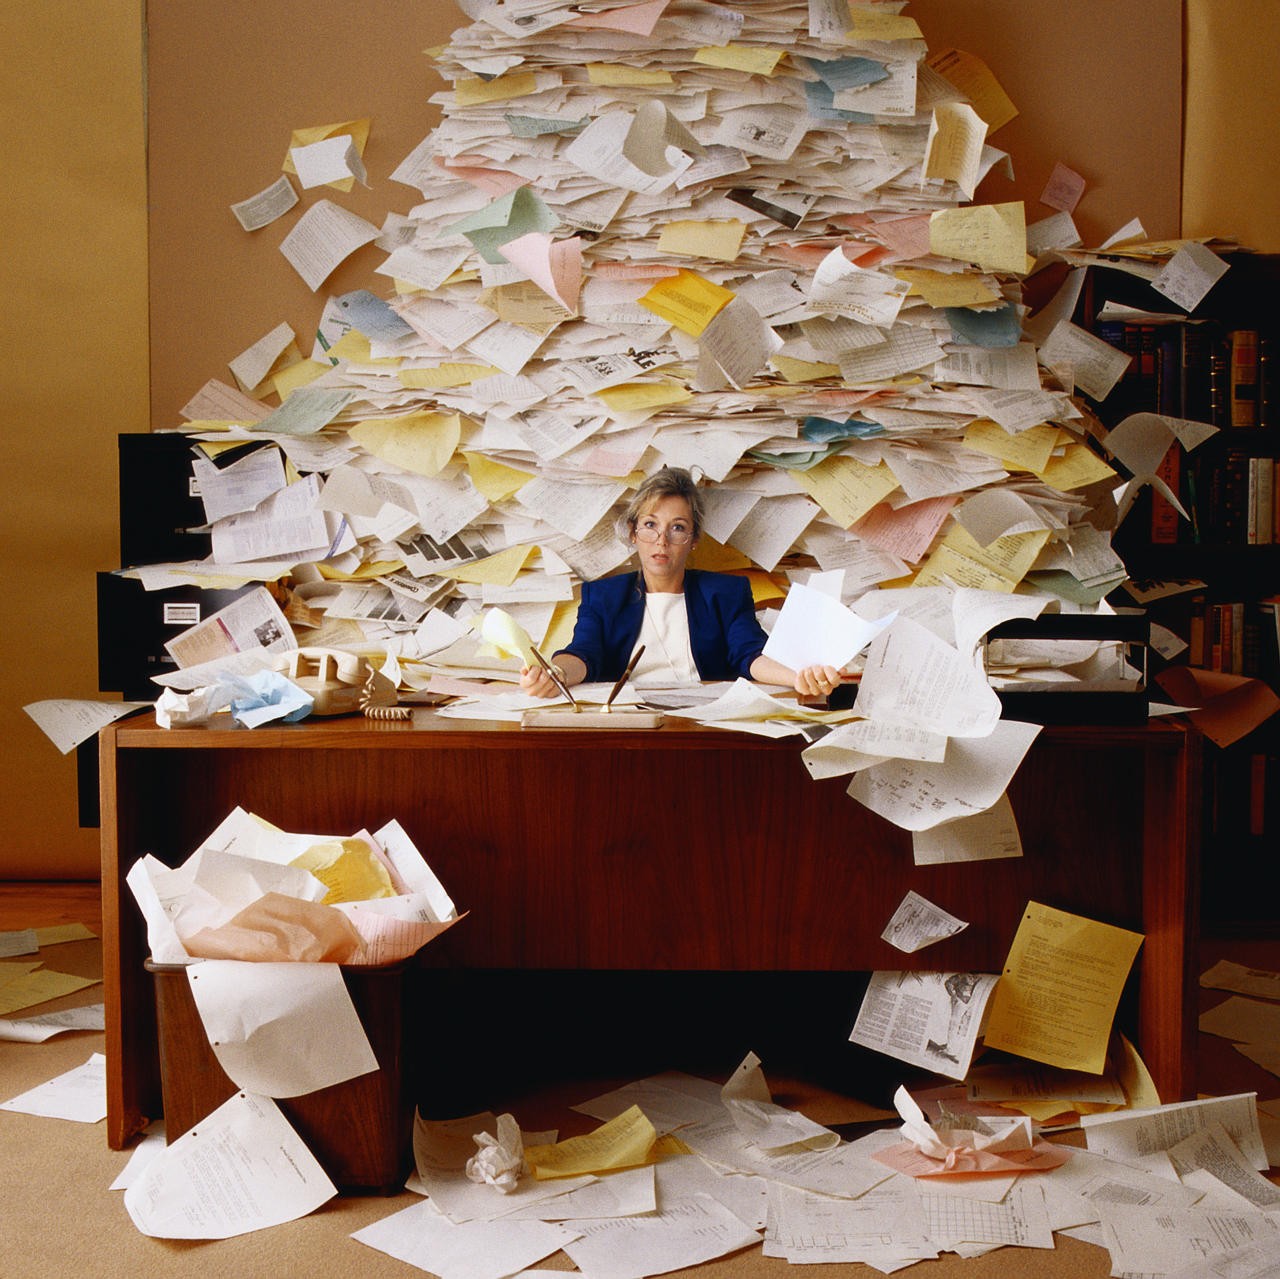 How CFOs Can Save Money by Going Paperless